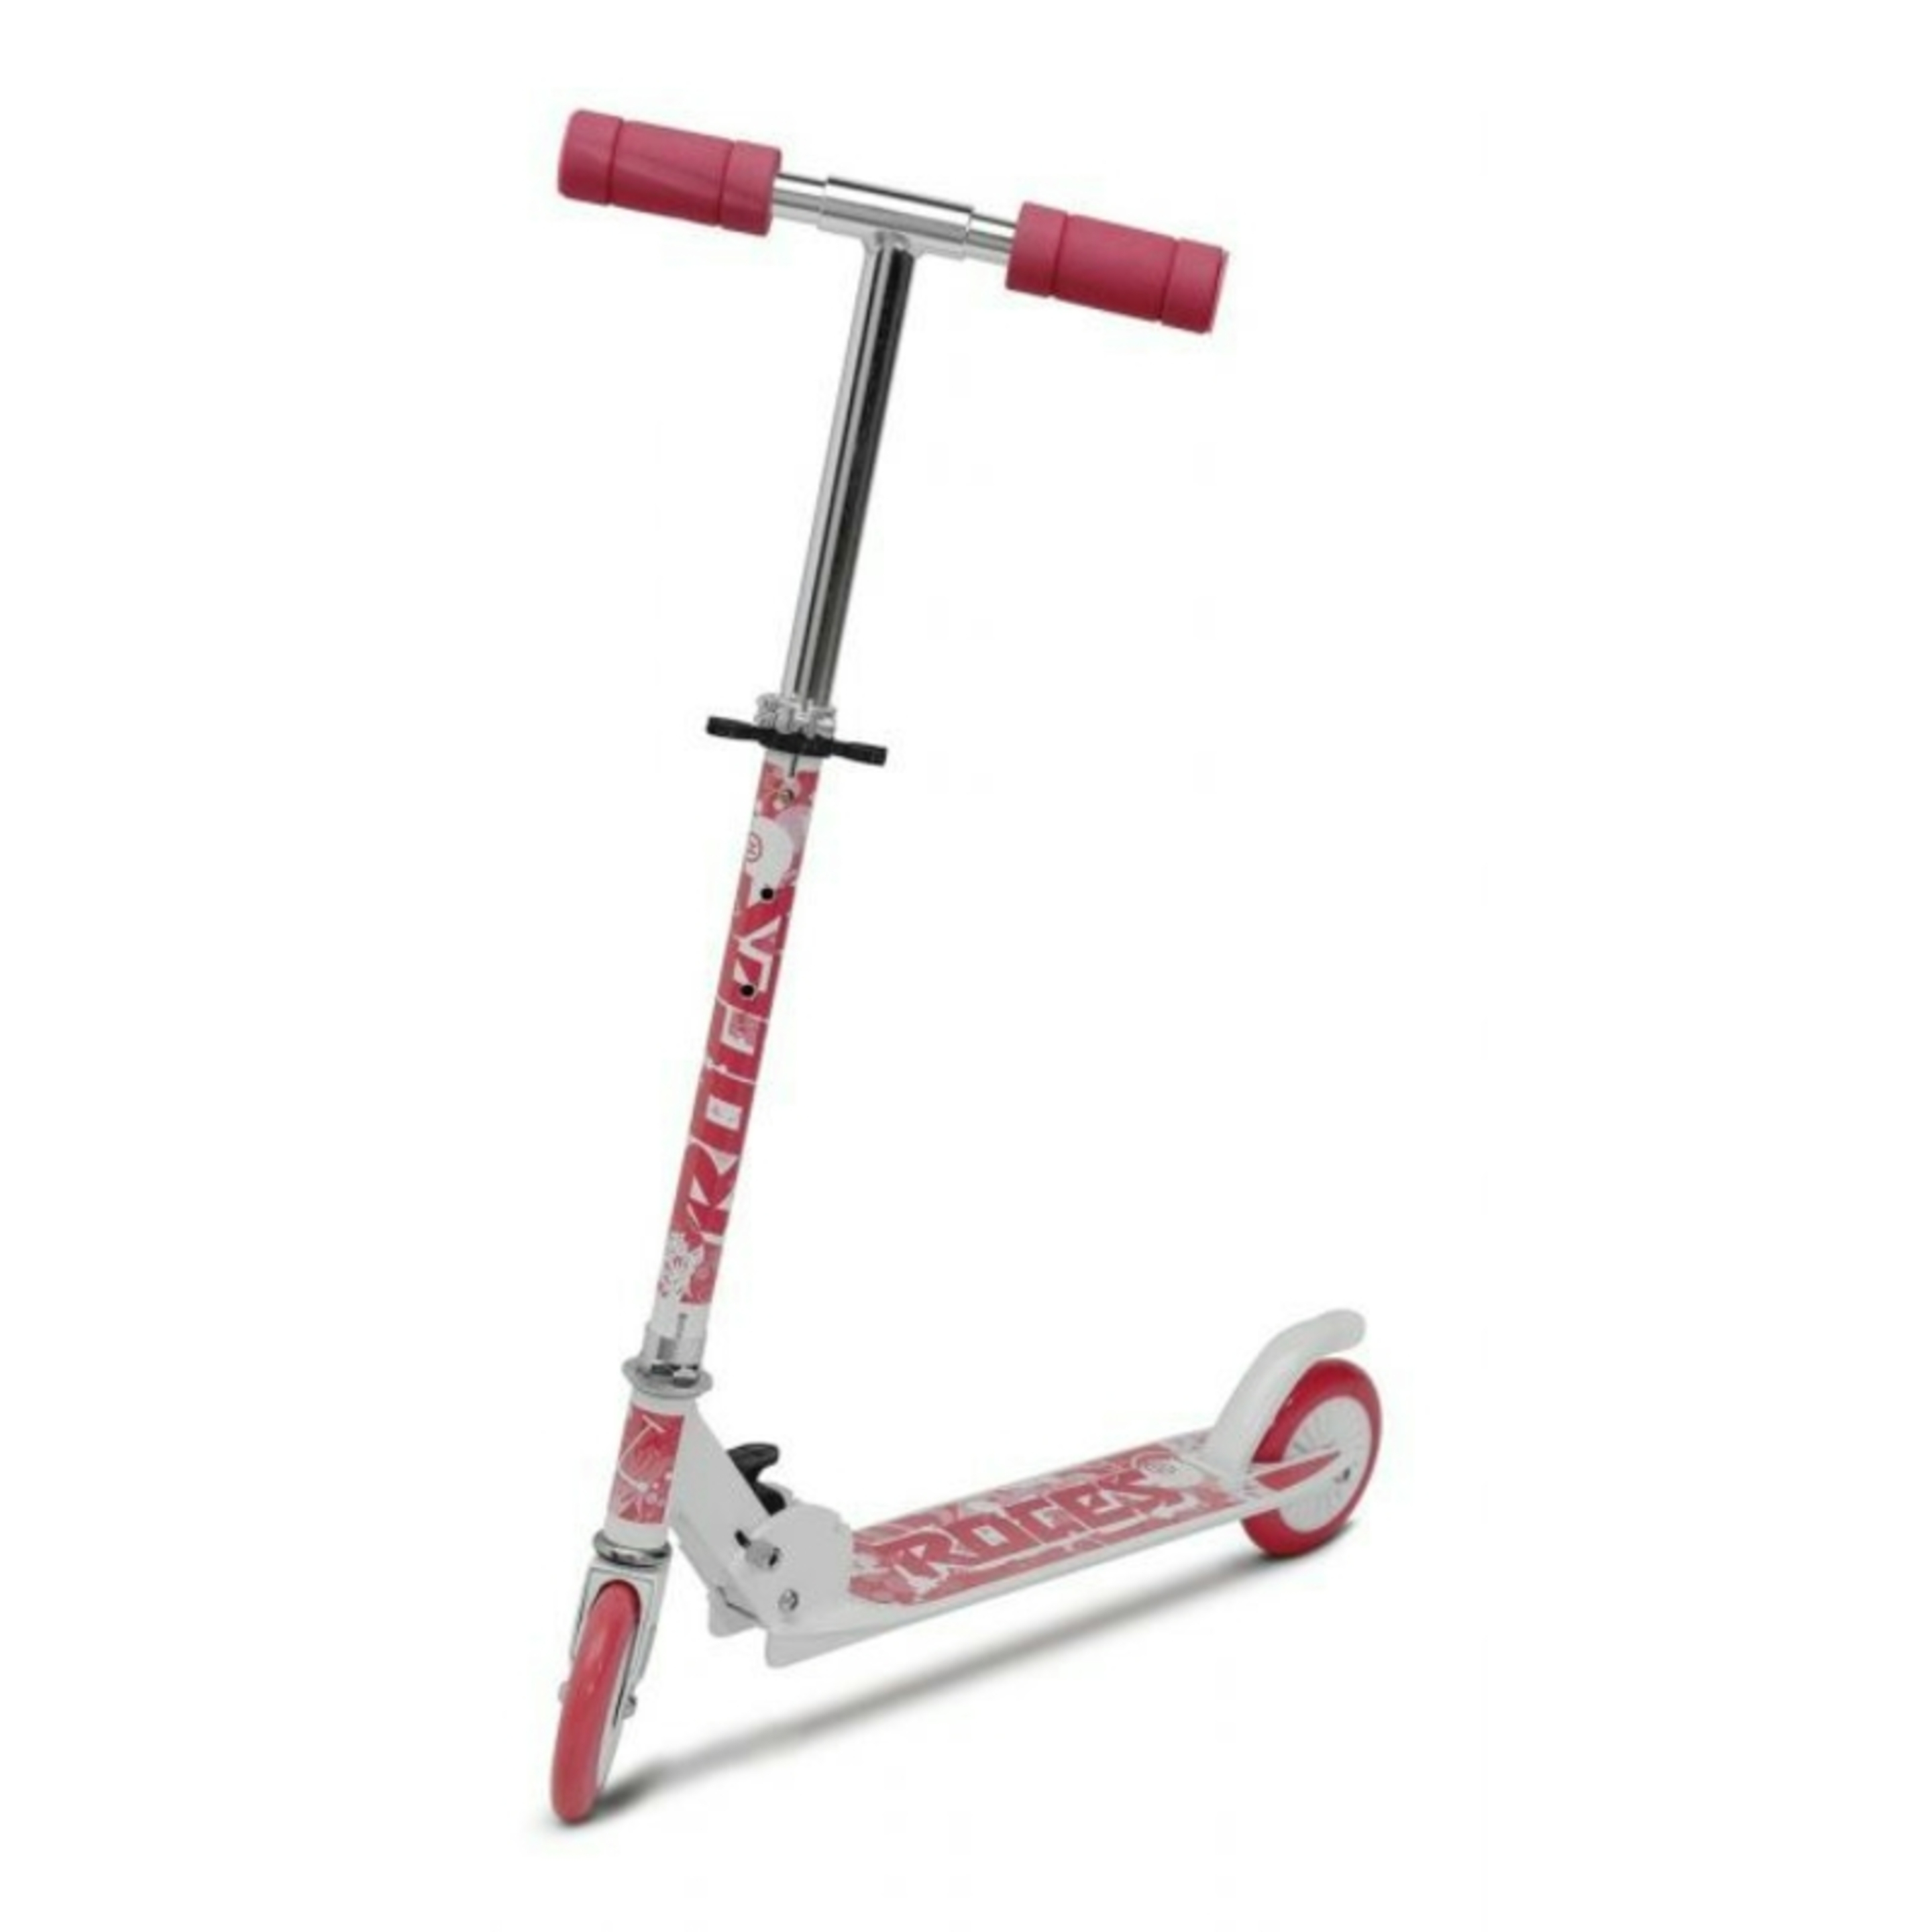 Scooter Roces Fun 125mm - Rosa  MKP